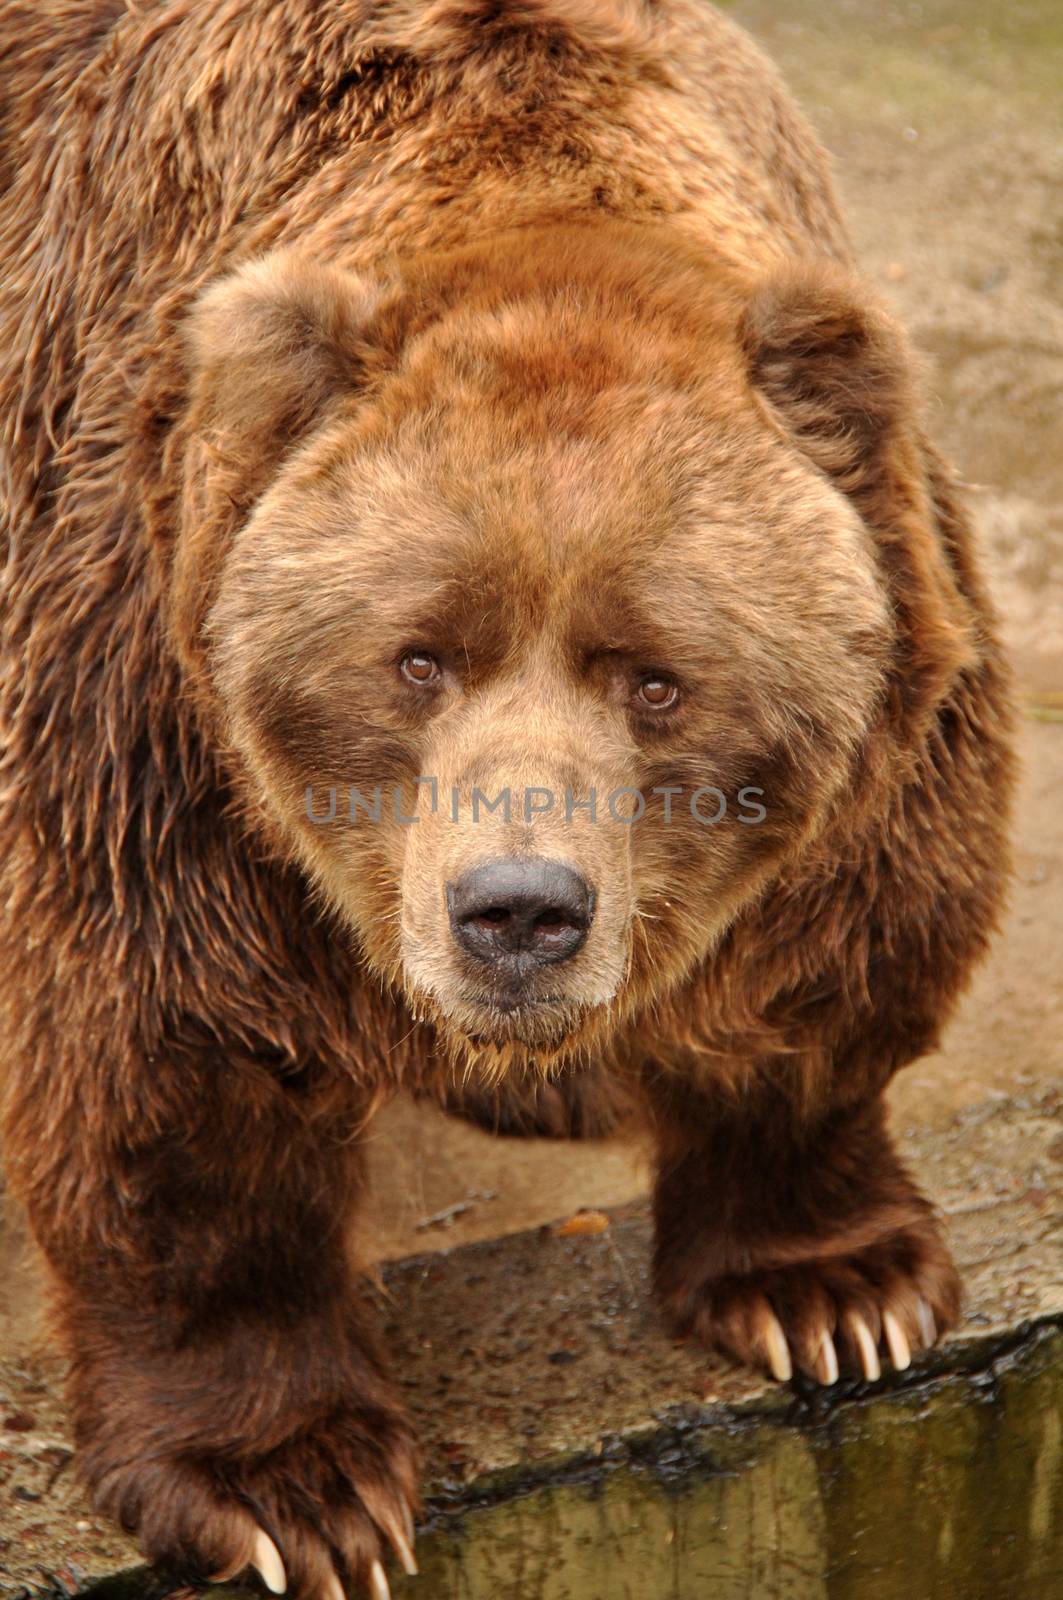 Grizzly brown bear looking at camera in zoo, Latvia